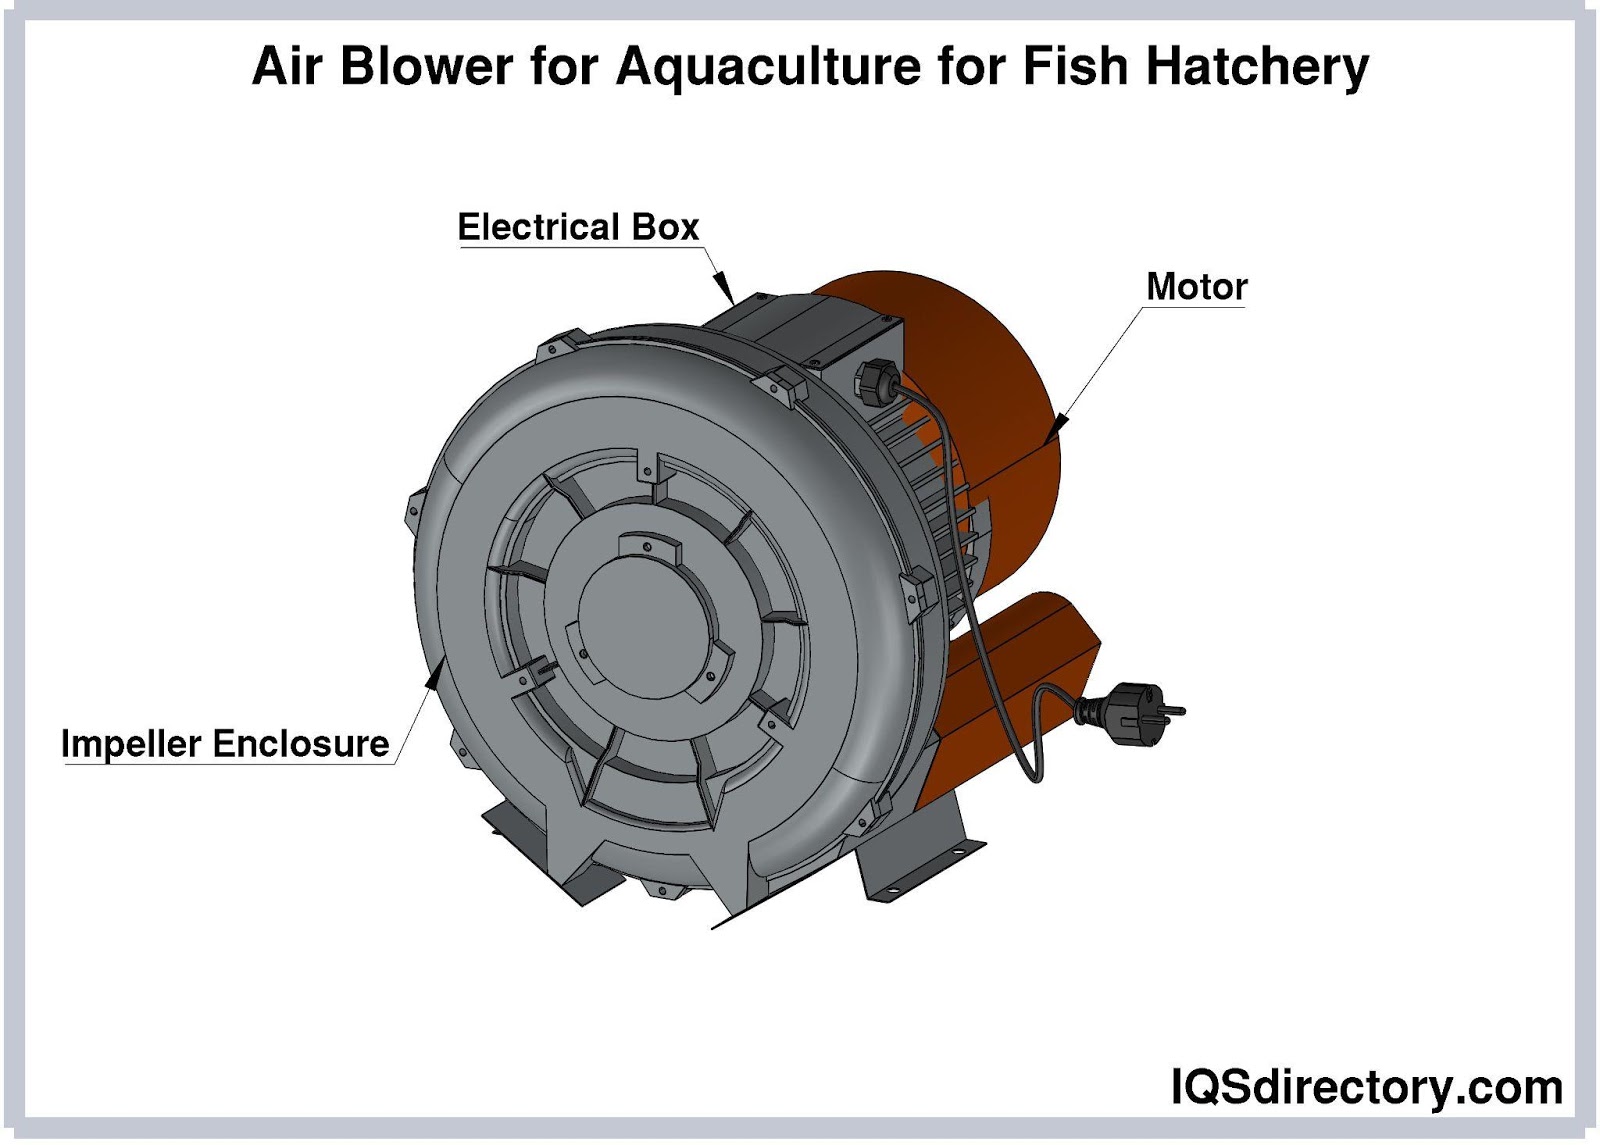 Air Blower for Aquaculture for Fish Hatchery